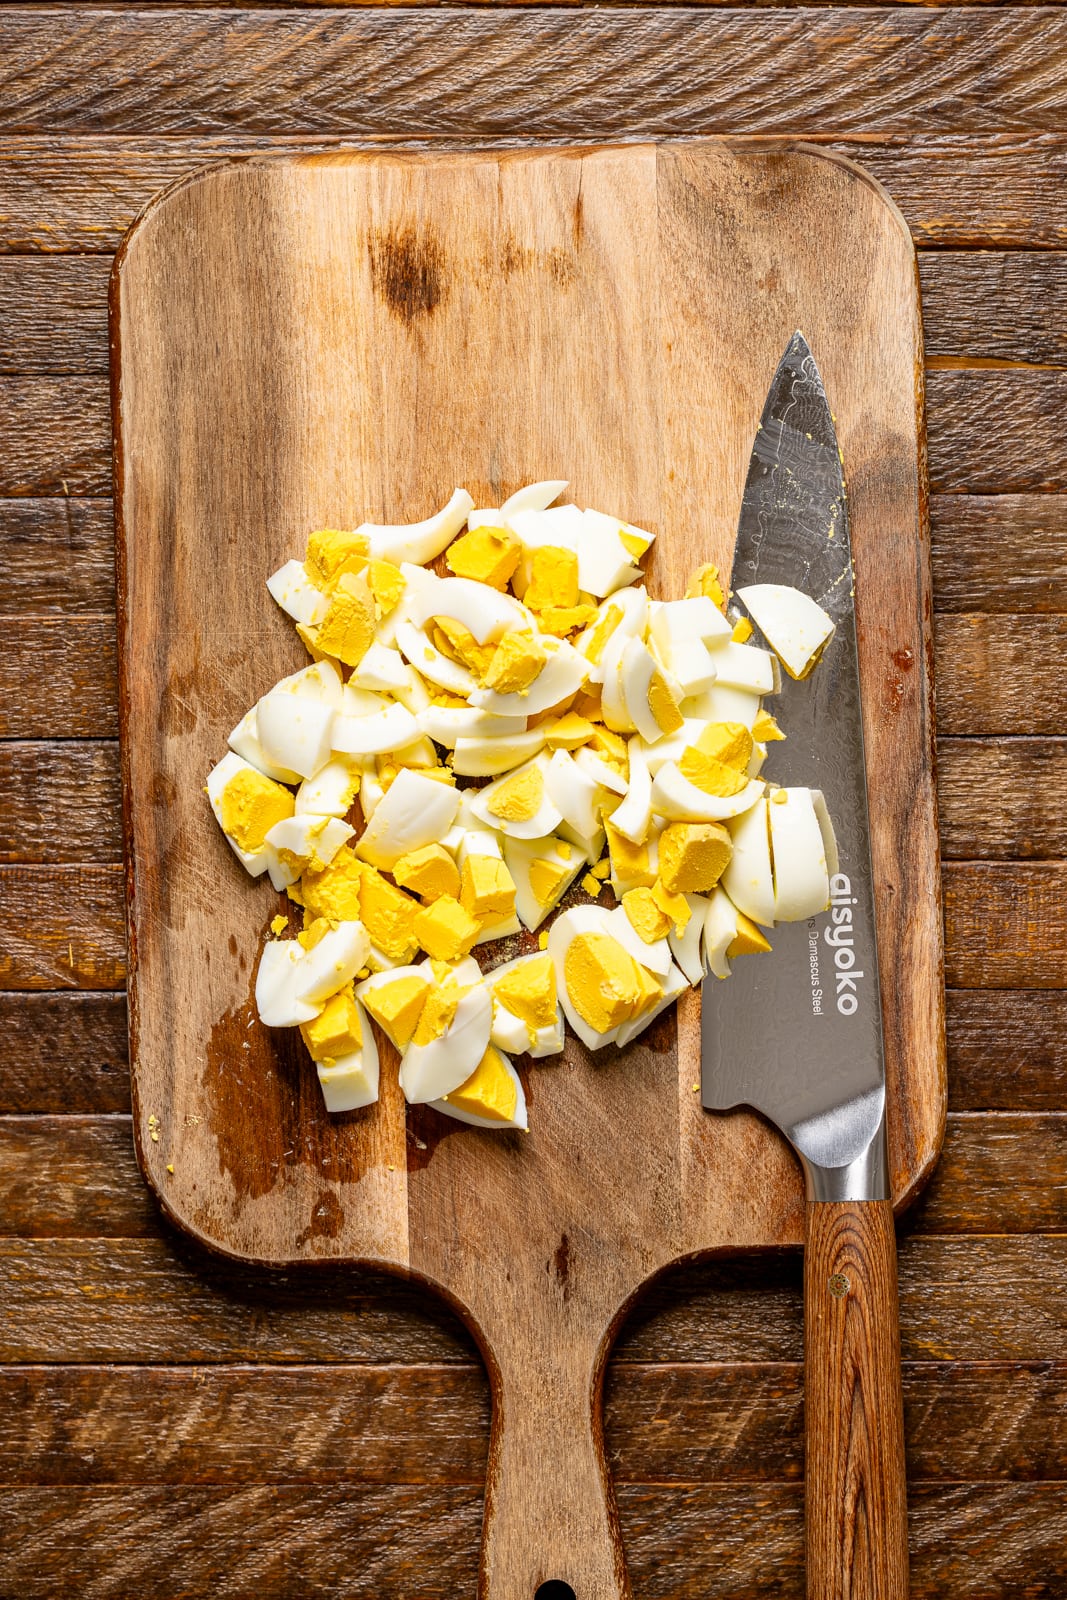 Chopped eggs on a cutting board with a knife.